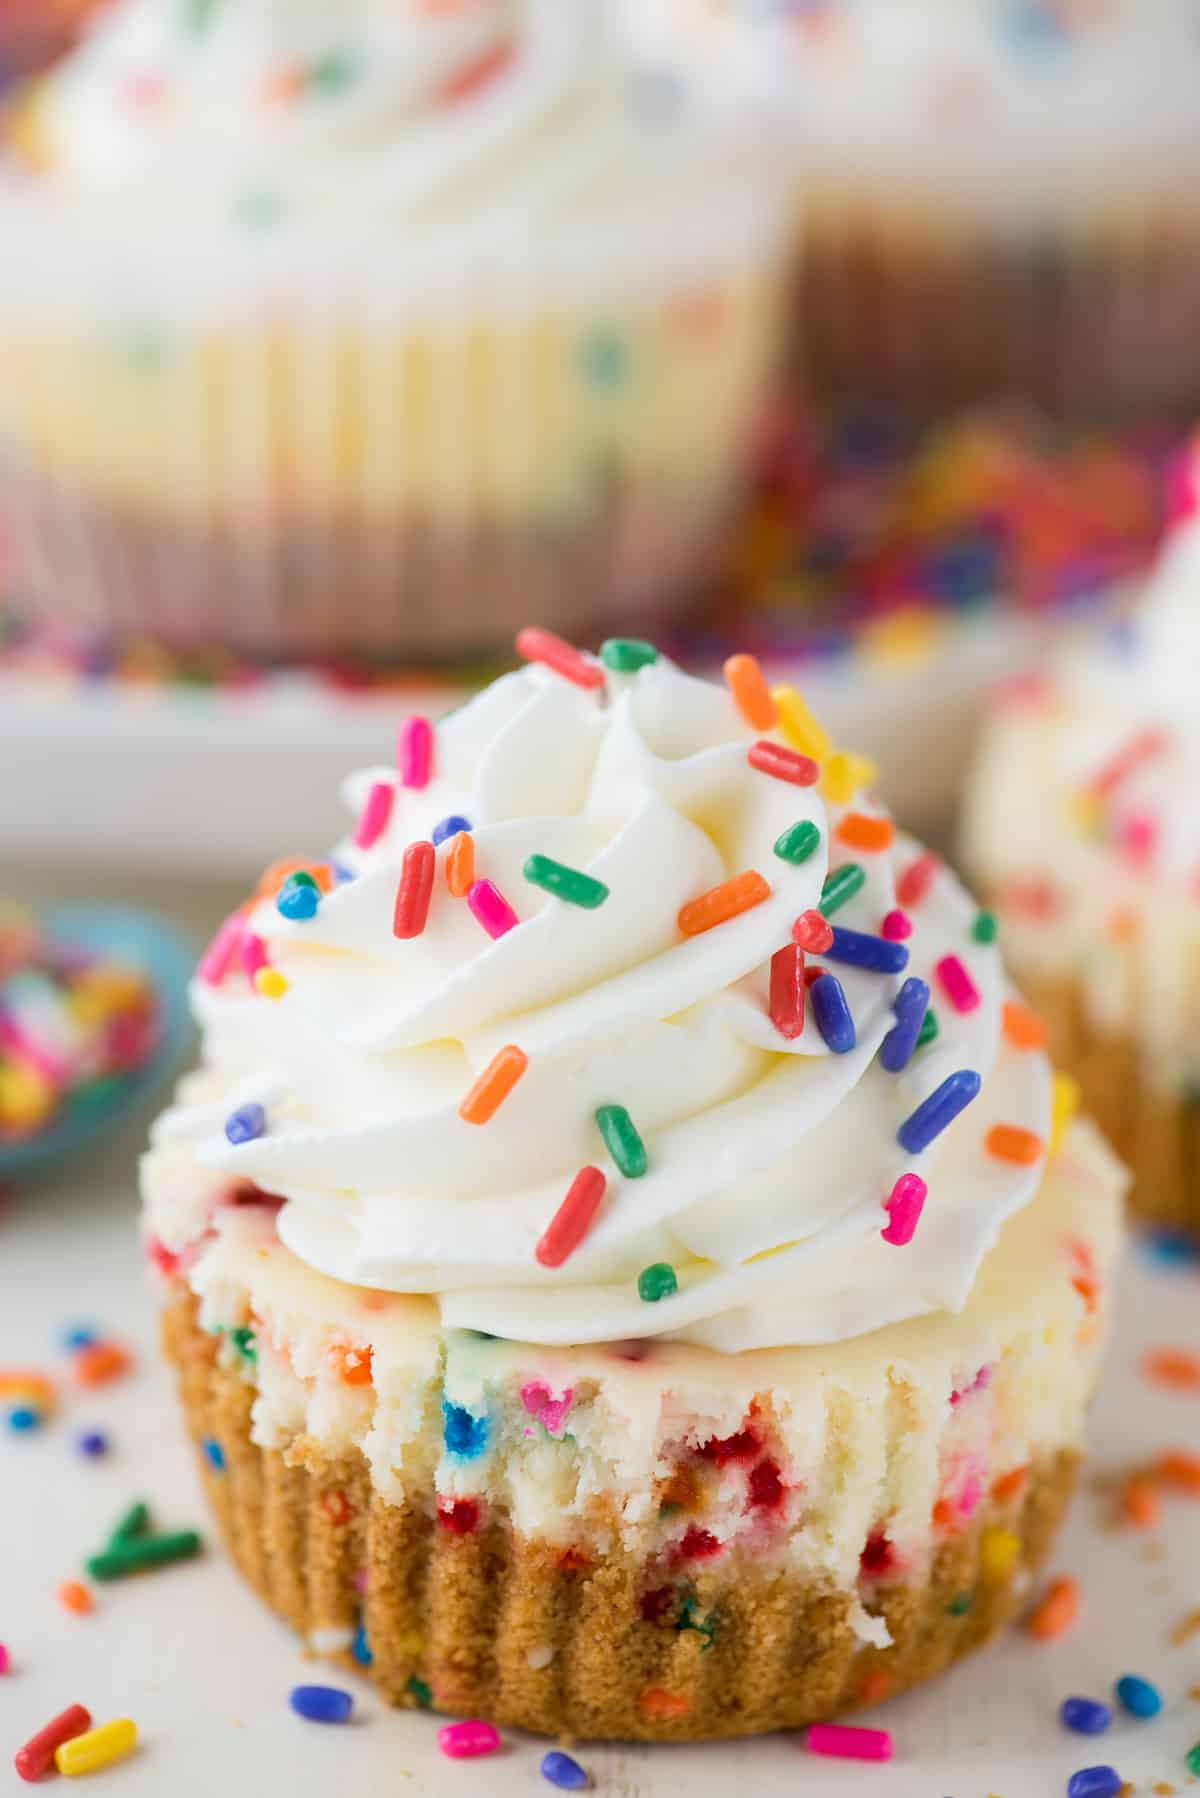 mini funfetti cheesecake with rainbow colored sprinkles on top